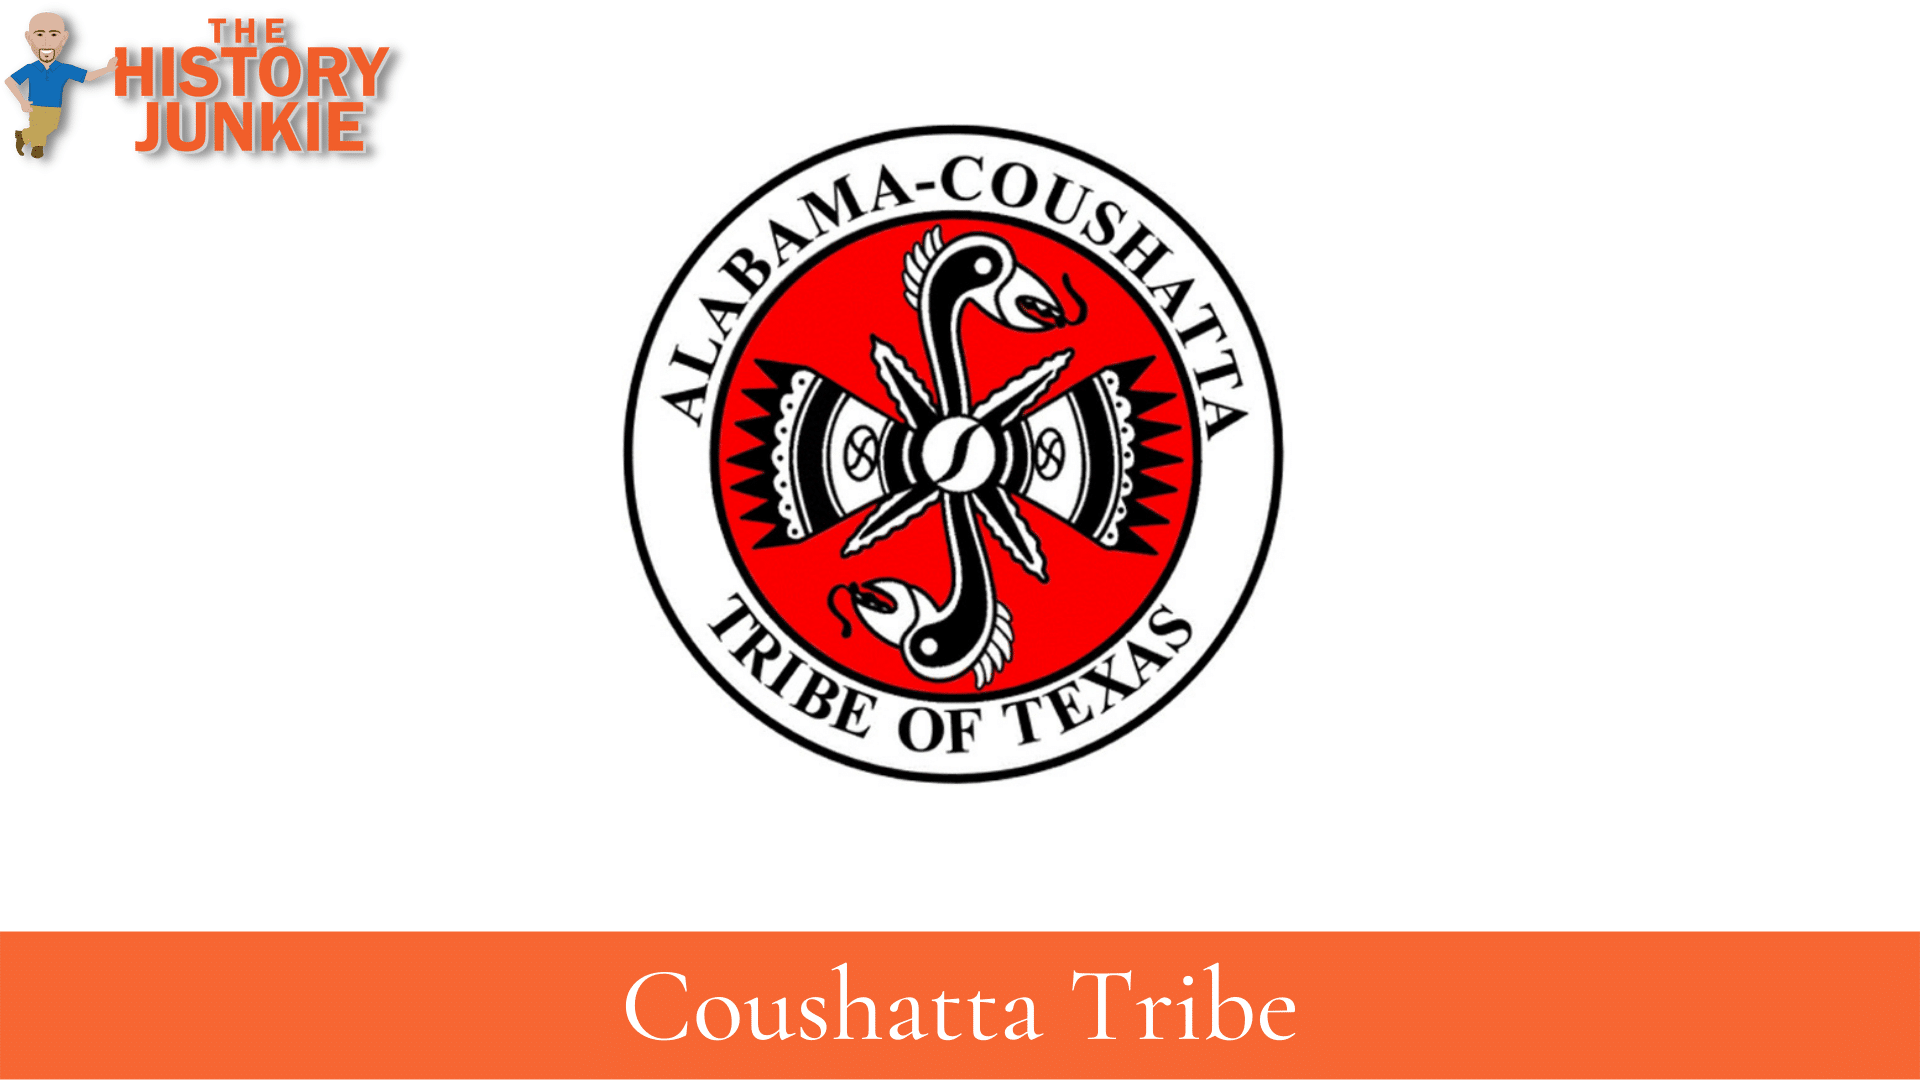 Coushatta Tribe Facts And History The History Junkie